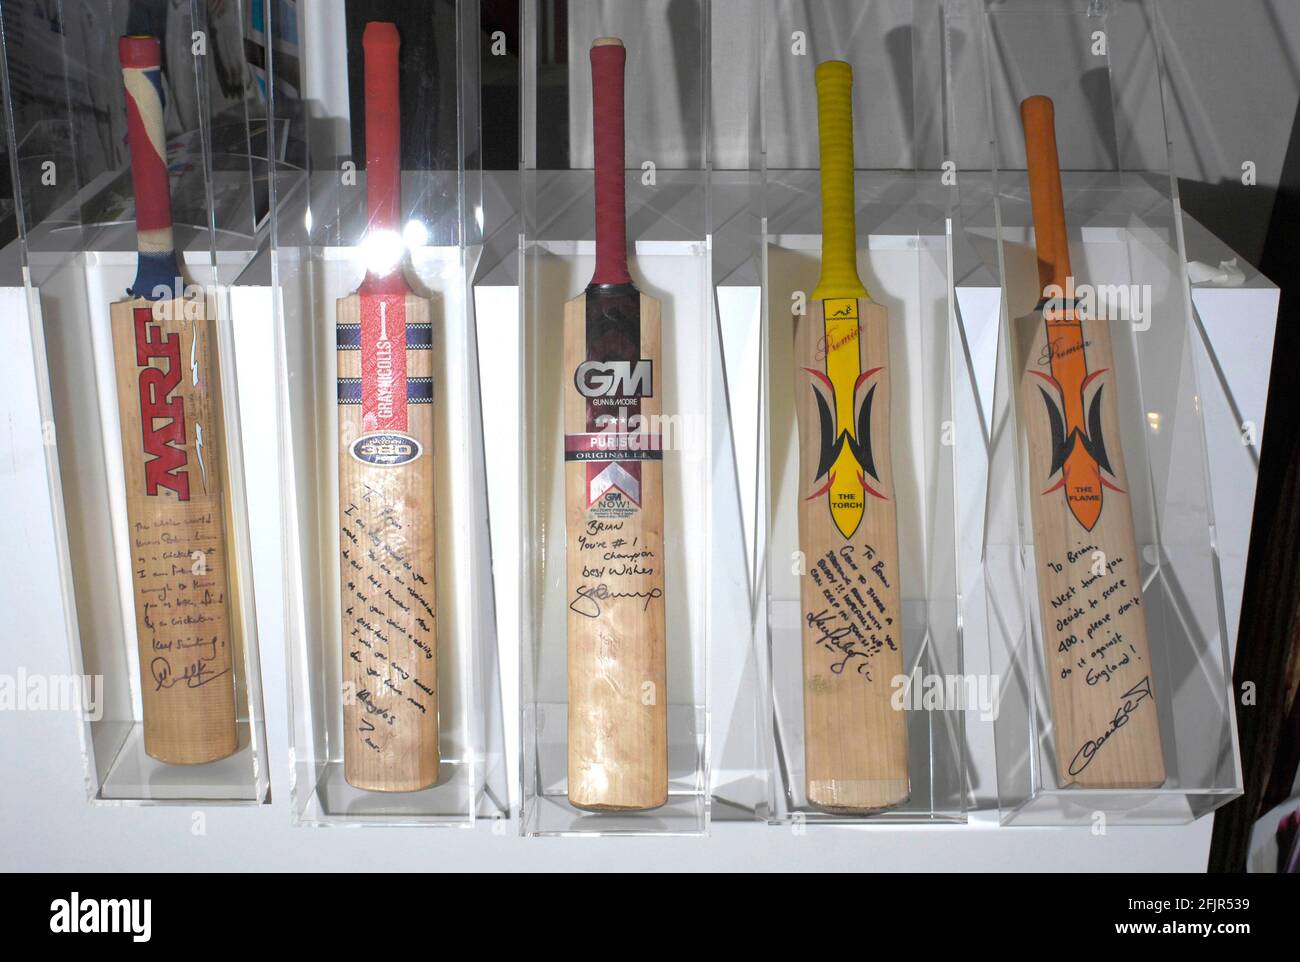 BRIAN LARA IN THE LORDS MUSEUM WHERE THERE IS A EXHIBITION OF HIS CRICKETING LIFE 14/5/07 PICTURE DAVID ASHDOWNPICTURED : A SELECTION OF HIS BATS WITH MESSAGES FROM FELLOW CRICKETERS Stock Photo